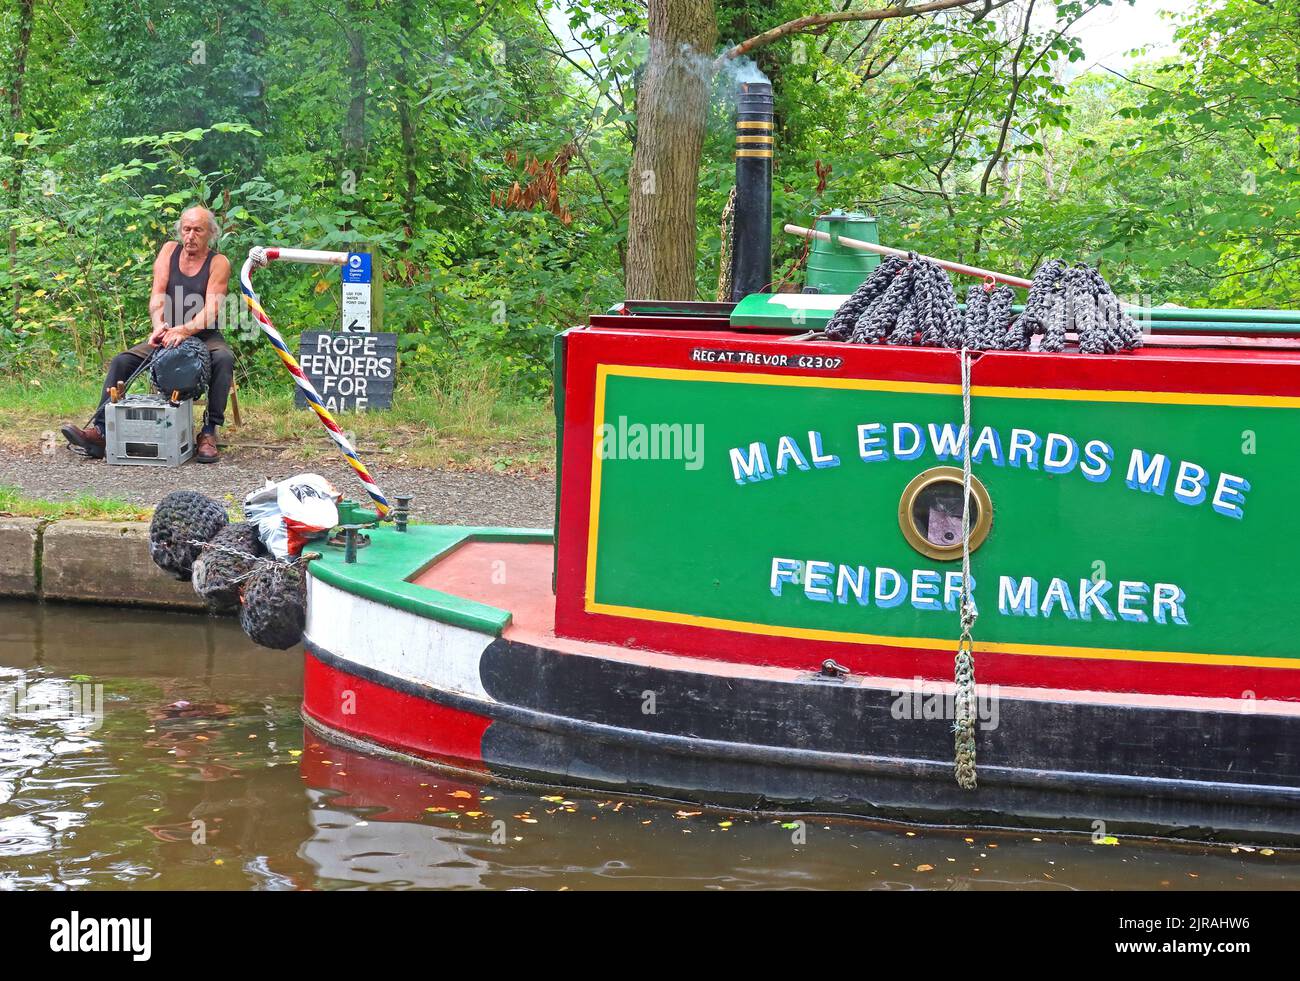 Mal Edwards MBE, Fender Maker, Llangollen canal, North Wales, UK Stock Photo